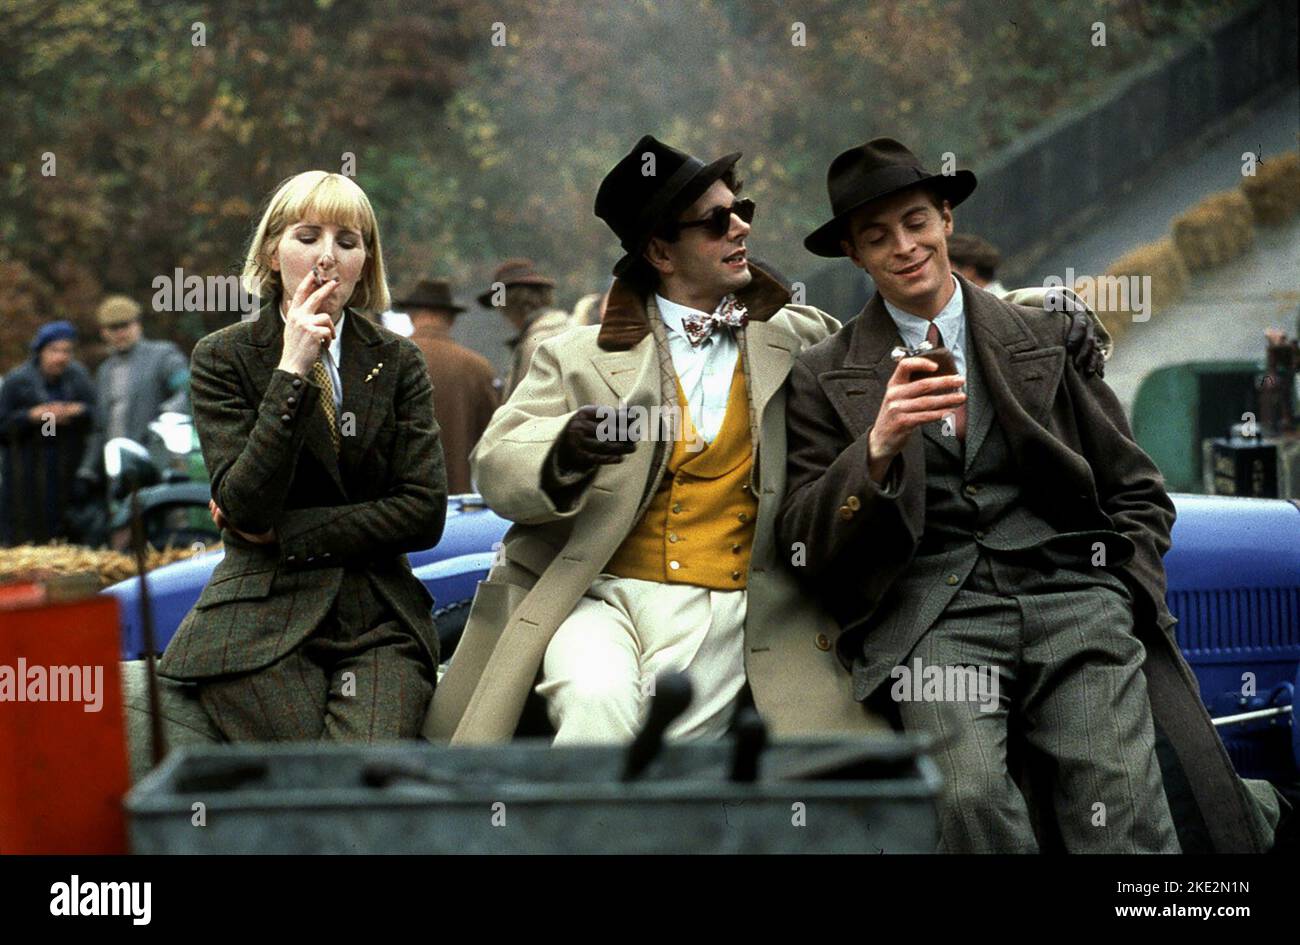 BRIGHT YOUNG THINGS, FENELLA WOOLGAR, MICHAEL SHEEN, STEPHEN CAMPBELL MOORE, 2003 Foto Stock